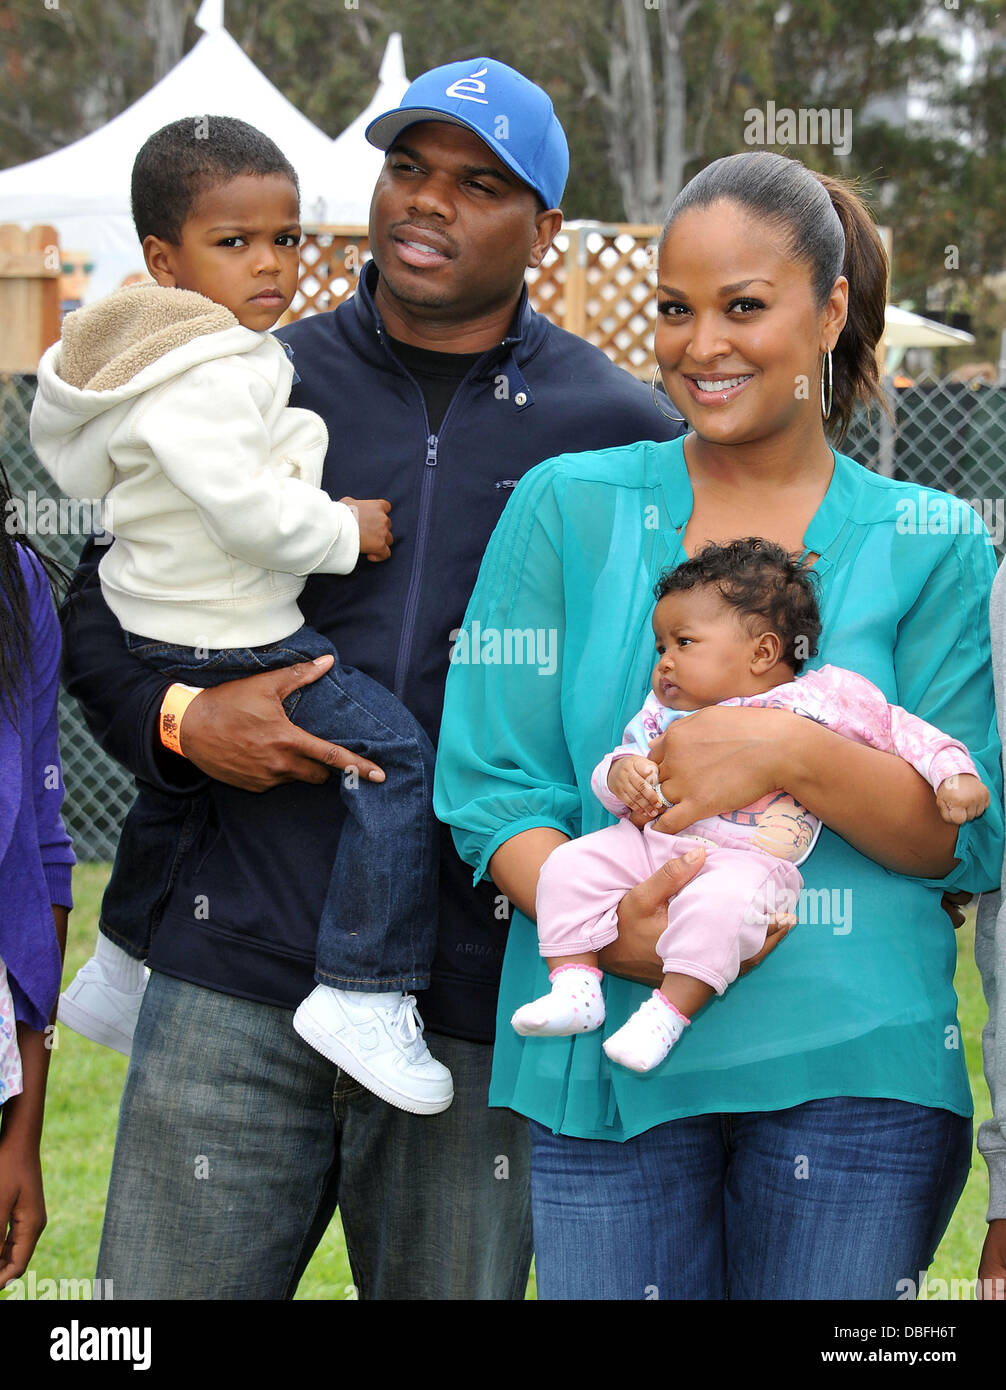 Laila Ali with her husband Curtis Conway, son Curtis and daughter Sydney 22nd Annual Time for Heroes Celebrity Picnic Sponsored By Disney to Benefit the Elizabeth Glaser Pediatric AIDS Foundation held at the Wadsworth Theater on the Veteran Administration Lawn Los Angeles, California - 12.06.11 Stock Photo